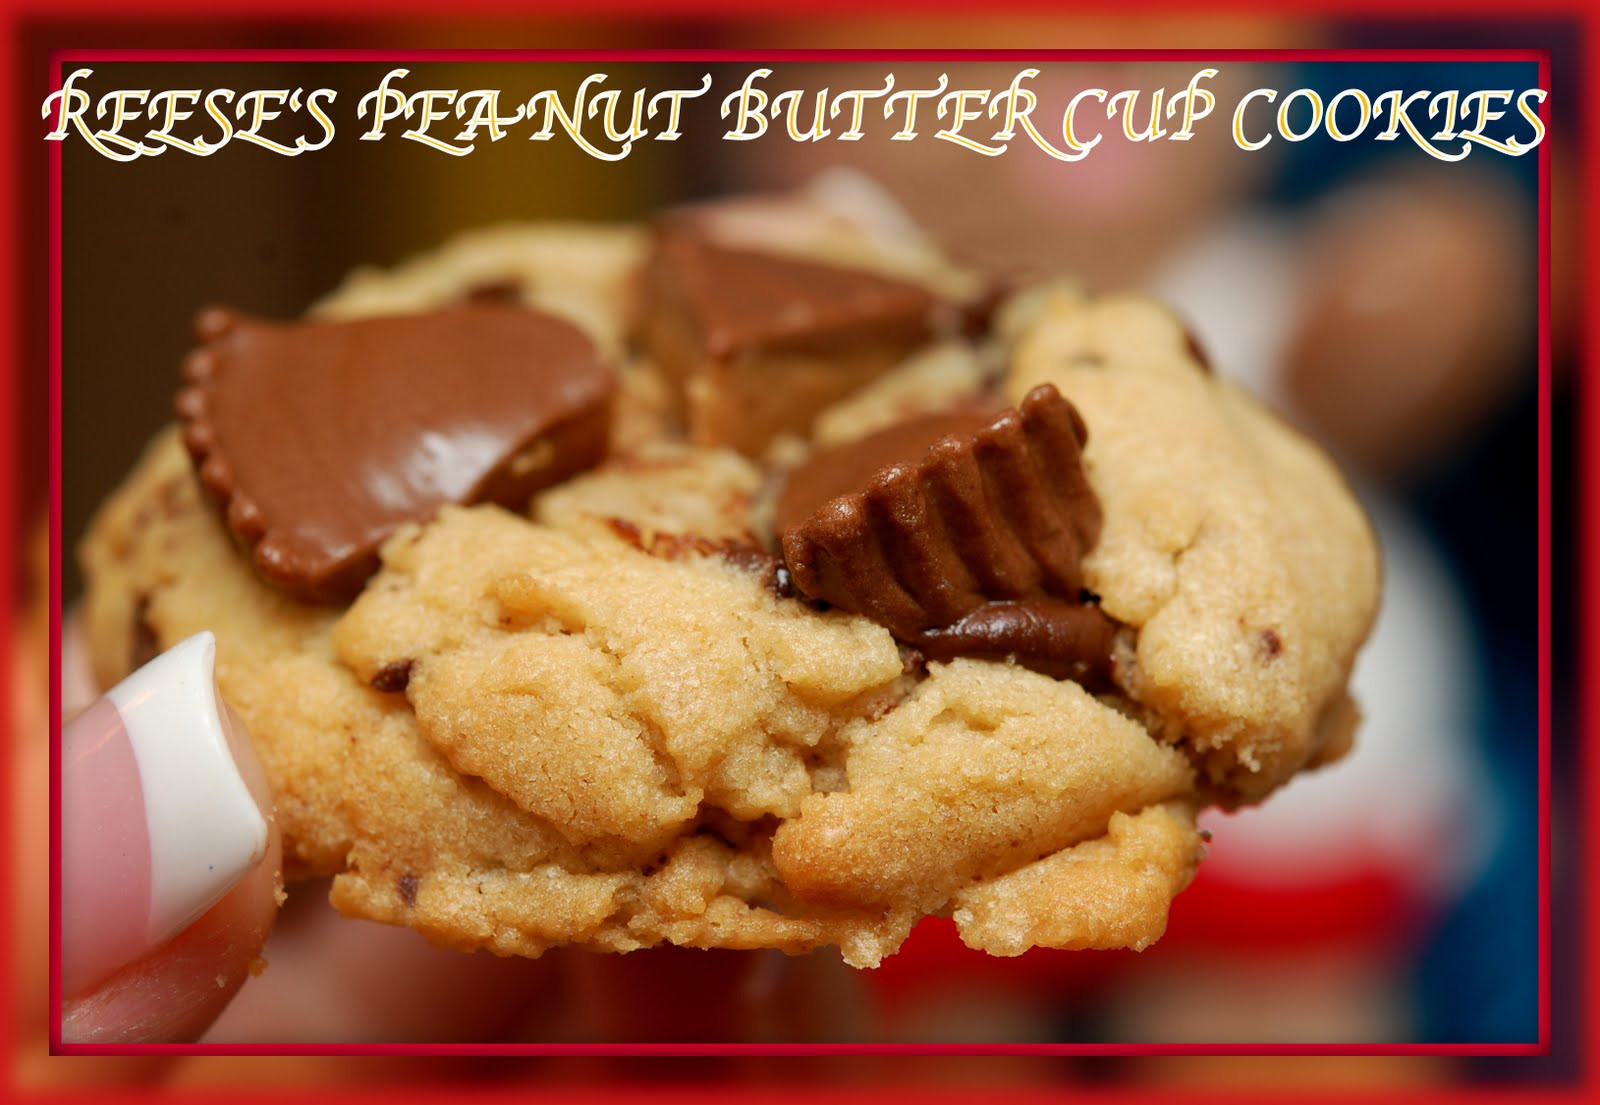 Reese Peanut Butter Cup Cookies Recipe
 OVER THE TOP REESE S PEANUT BUTTER CUP COOKIES Hugs and